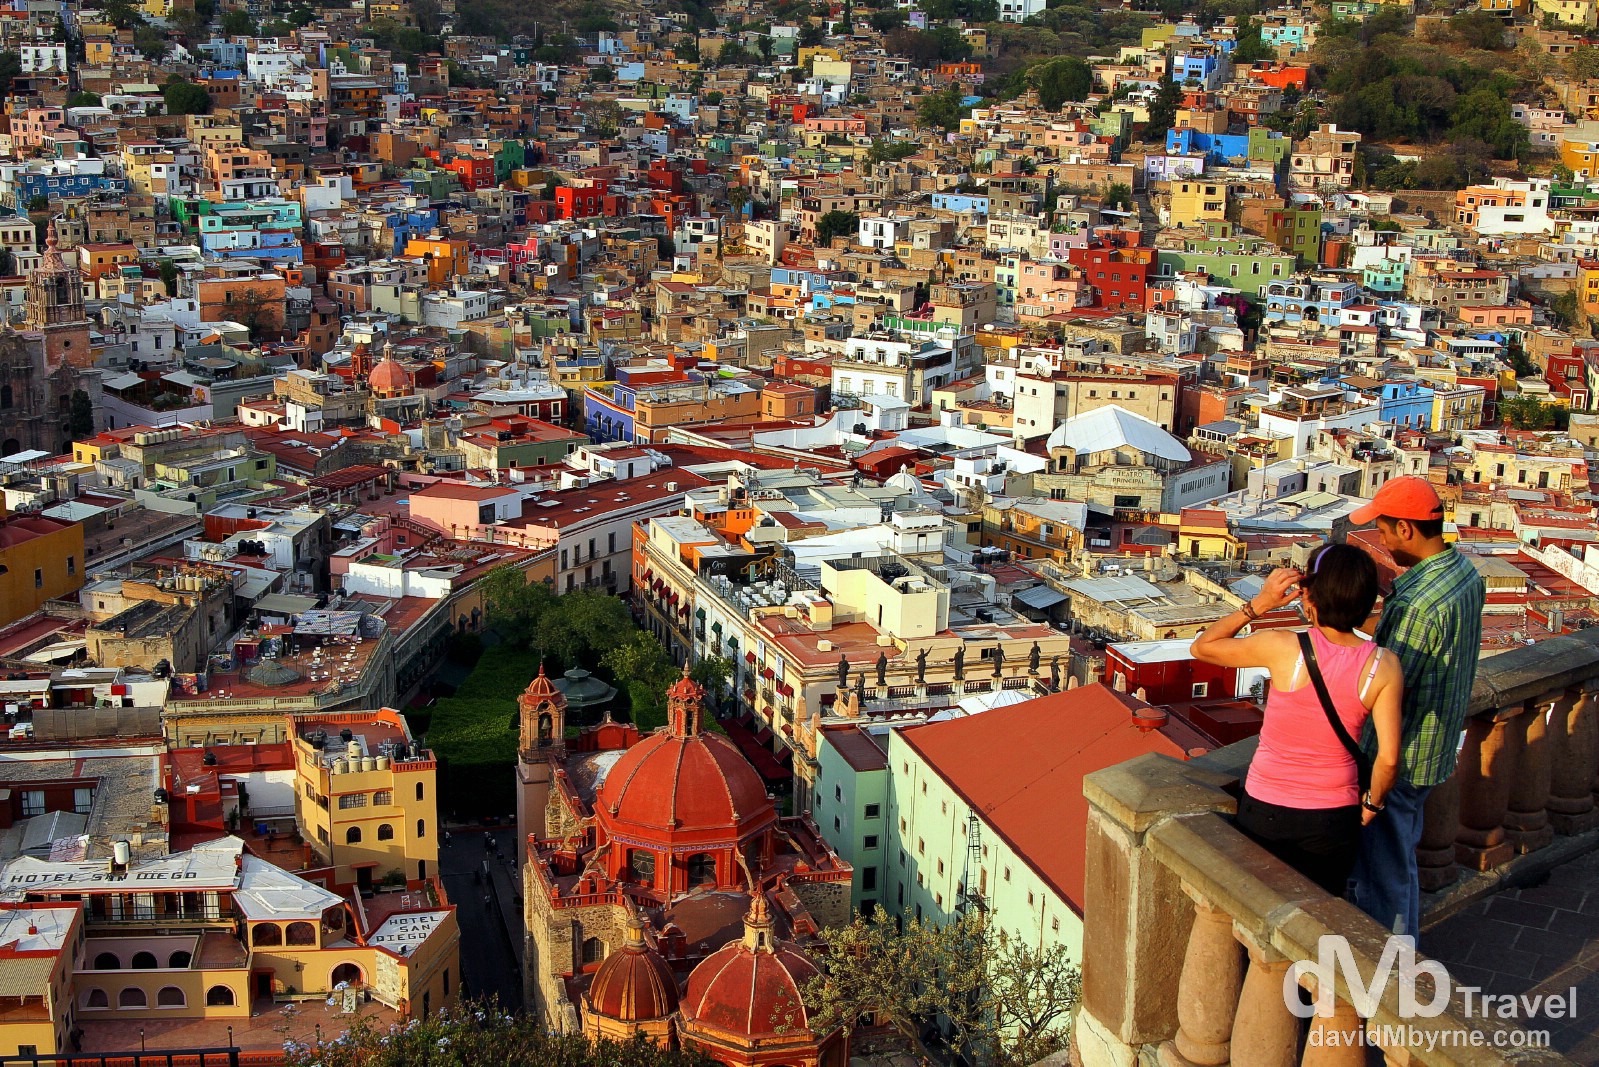 Overlooking UNESCO World Heritage listed Quanajuato as the sun sets from Panoromica. Riding the (very short) Funicular from behind Teatro Juarez to the top of San Miguel Hill is one of the must-do Guanajuato activities - you could of course walk up or, better still & as I did, get the funicular up and get lost in the jumble of photographic lanes by walking down (it's not far). This vantage point is visible from all over the city as it houses a 28-metre-tall statue, called El Pipila, of an independence hero who wore a stone slab on his back to protect himself while burning the Spanish troops holed up in the city's  Alhóndiga, or granary, in September 1810. The views here are spectacular, especially towards the end of the day when the light is at its softest. Guanajuato, Mexico. April 23rd 2013.